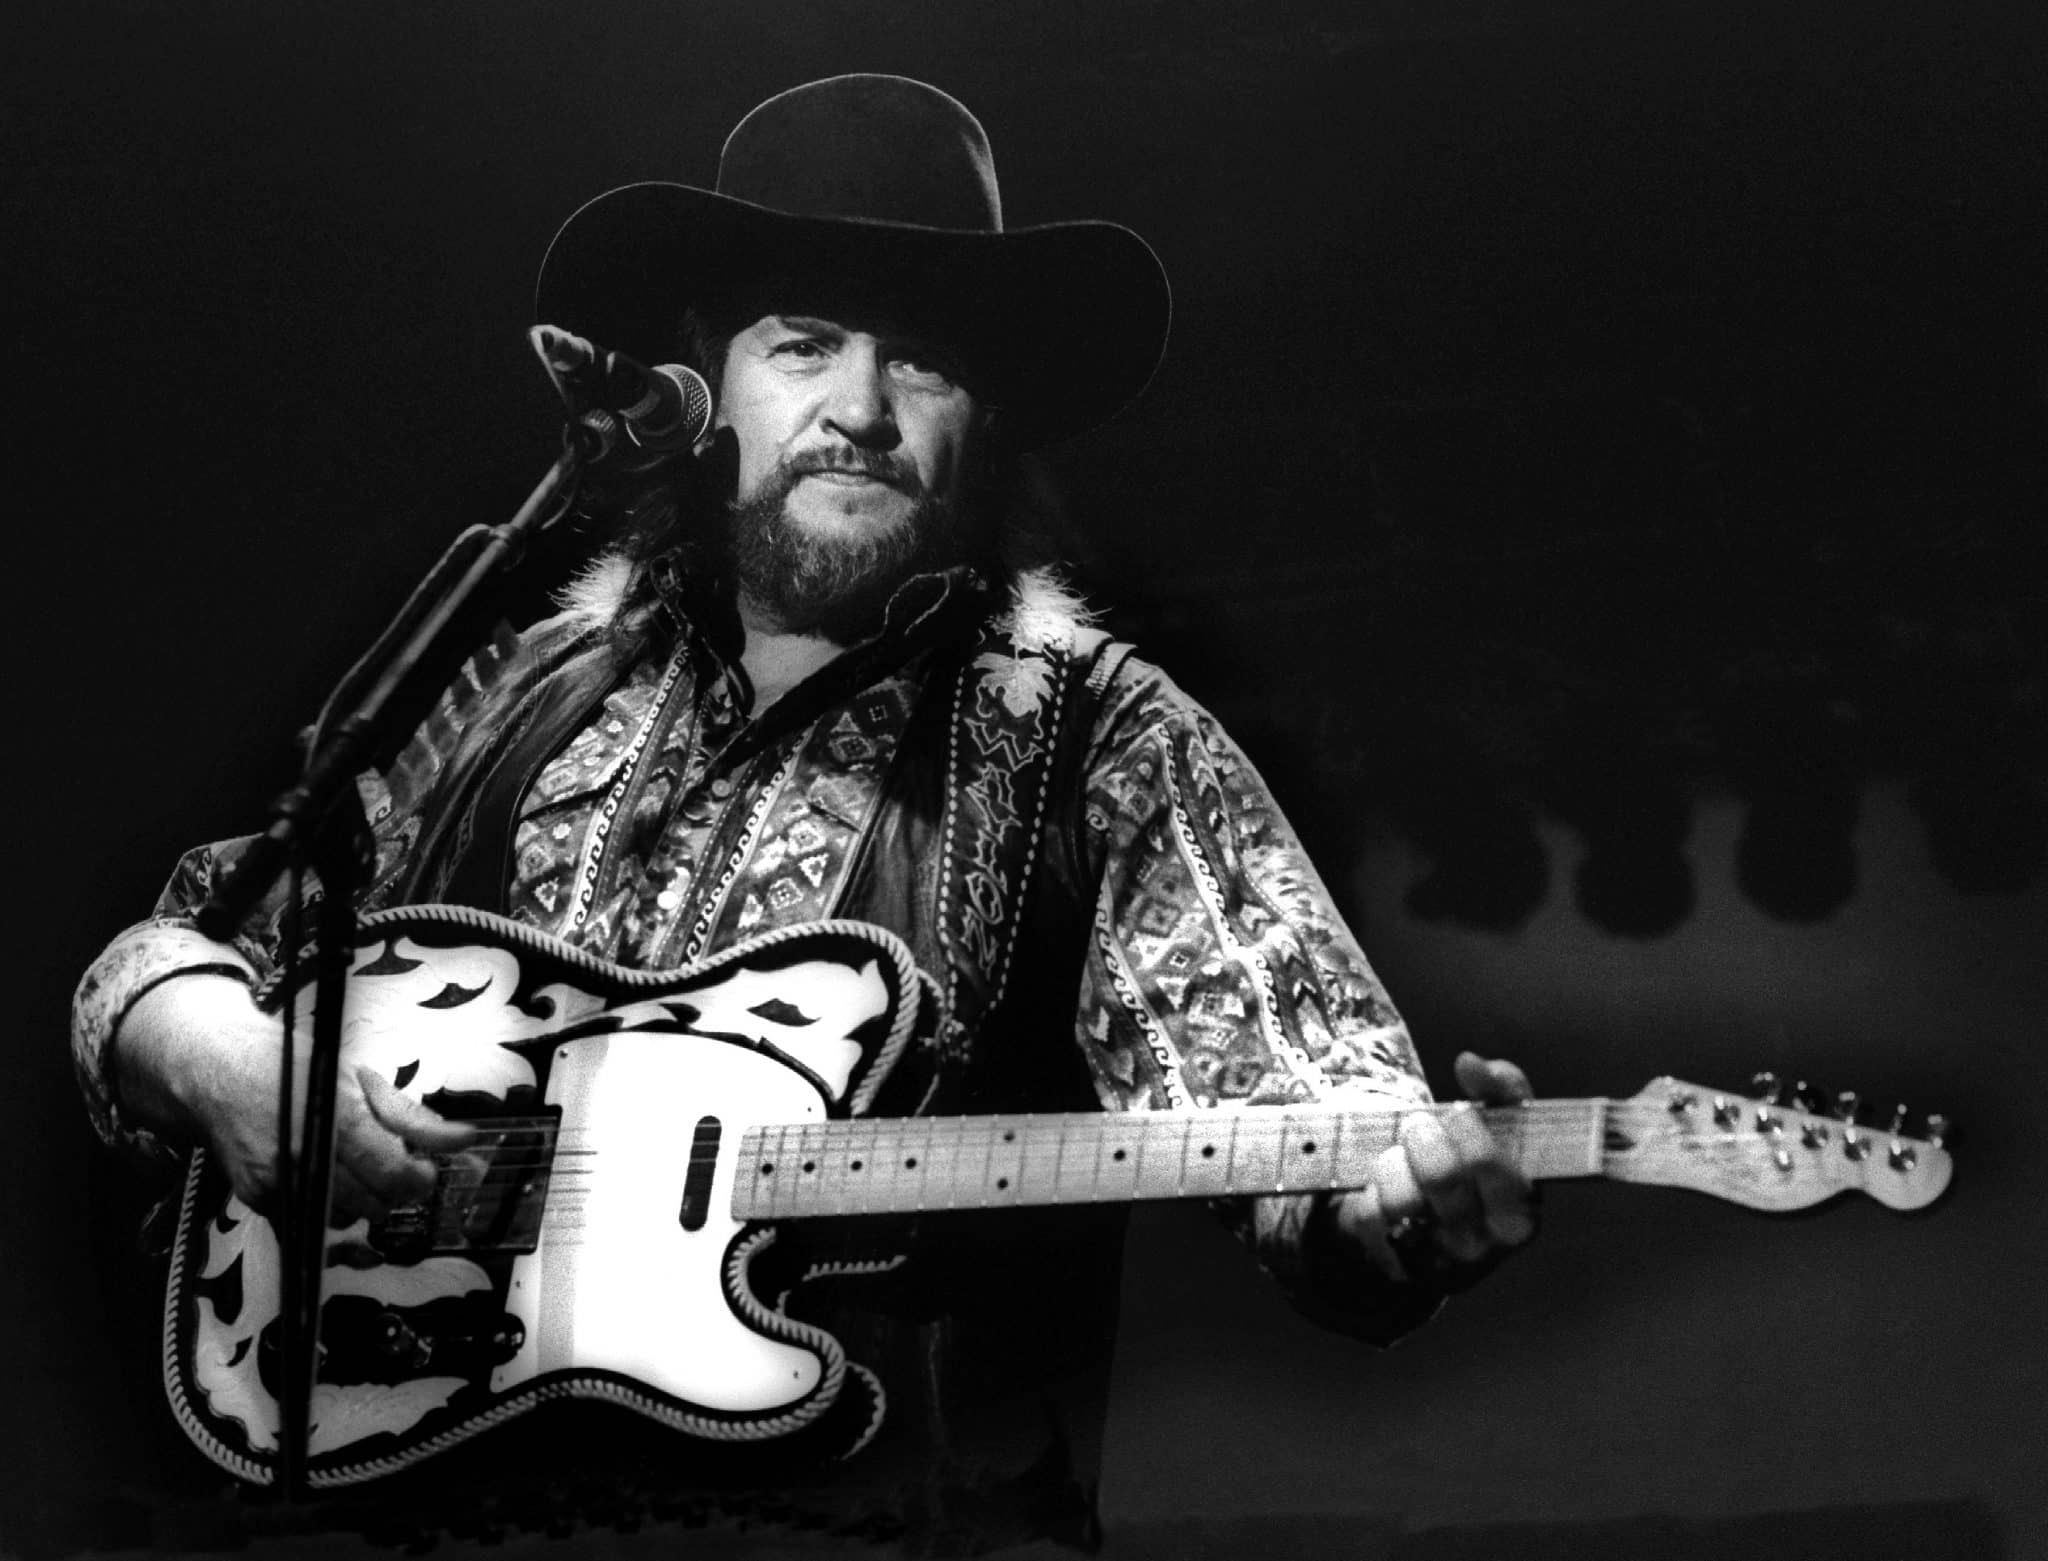 Waylon Jennings of The Highwaymen performs on stage, Ahoy, Rotterdam, 20th April 1992. He plays a Fender Telecaster guitar. 